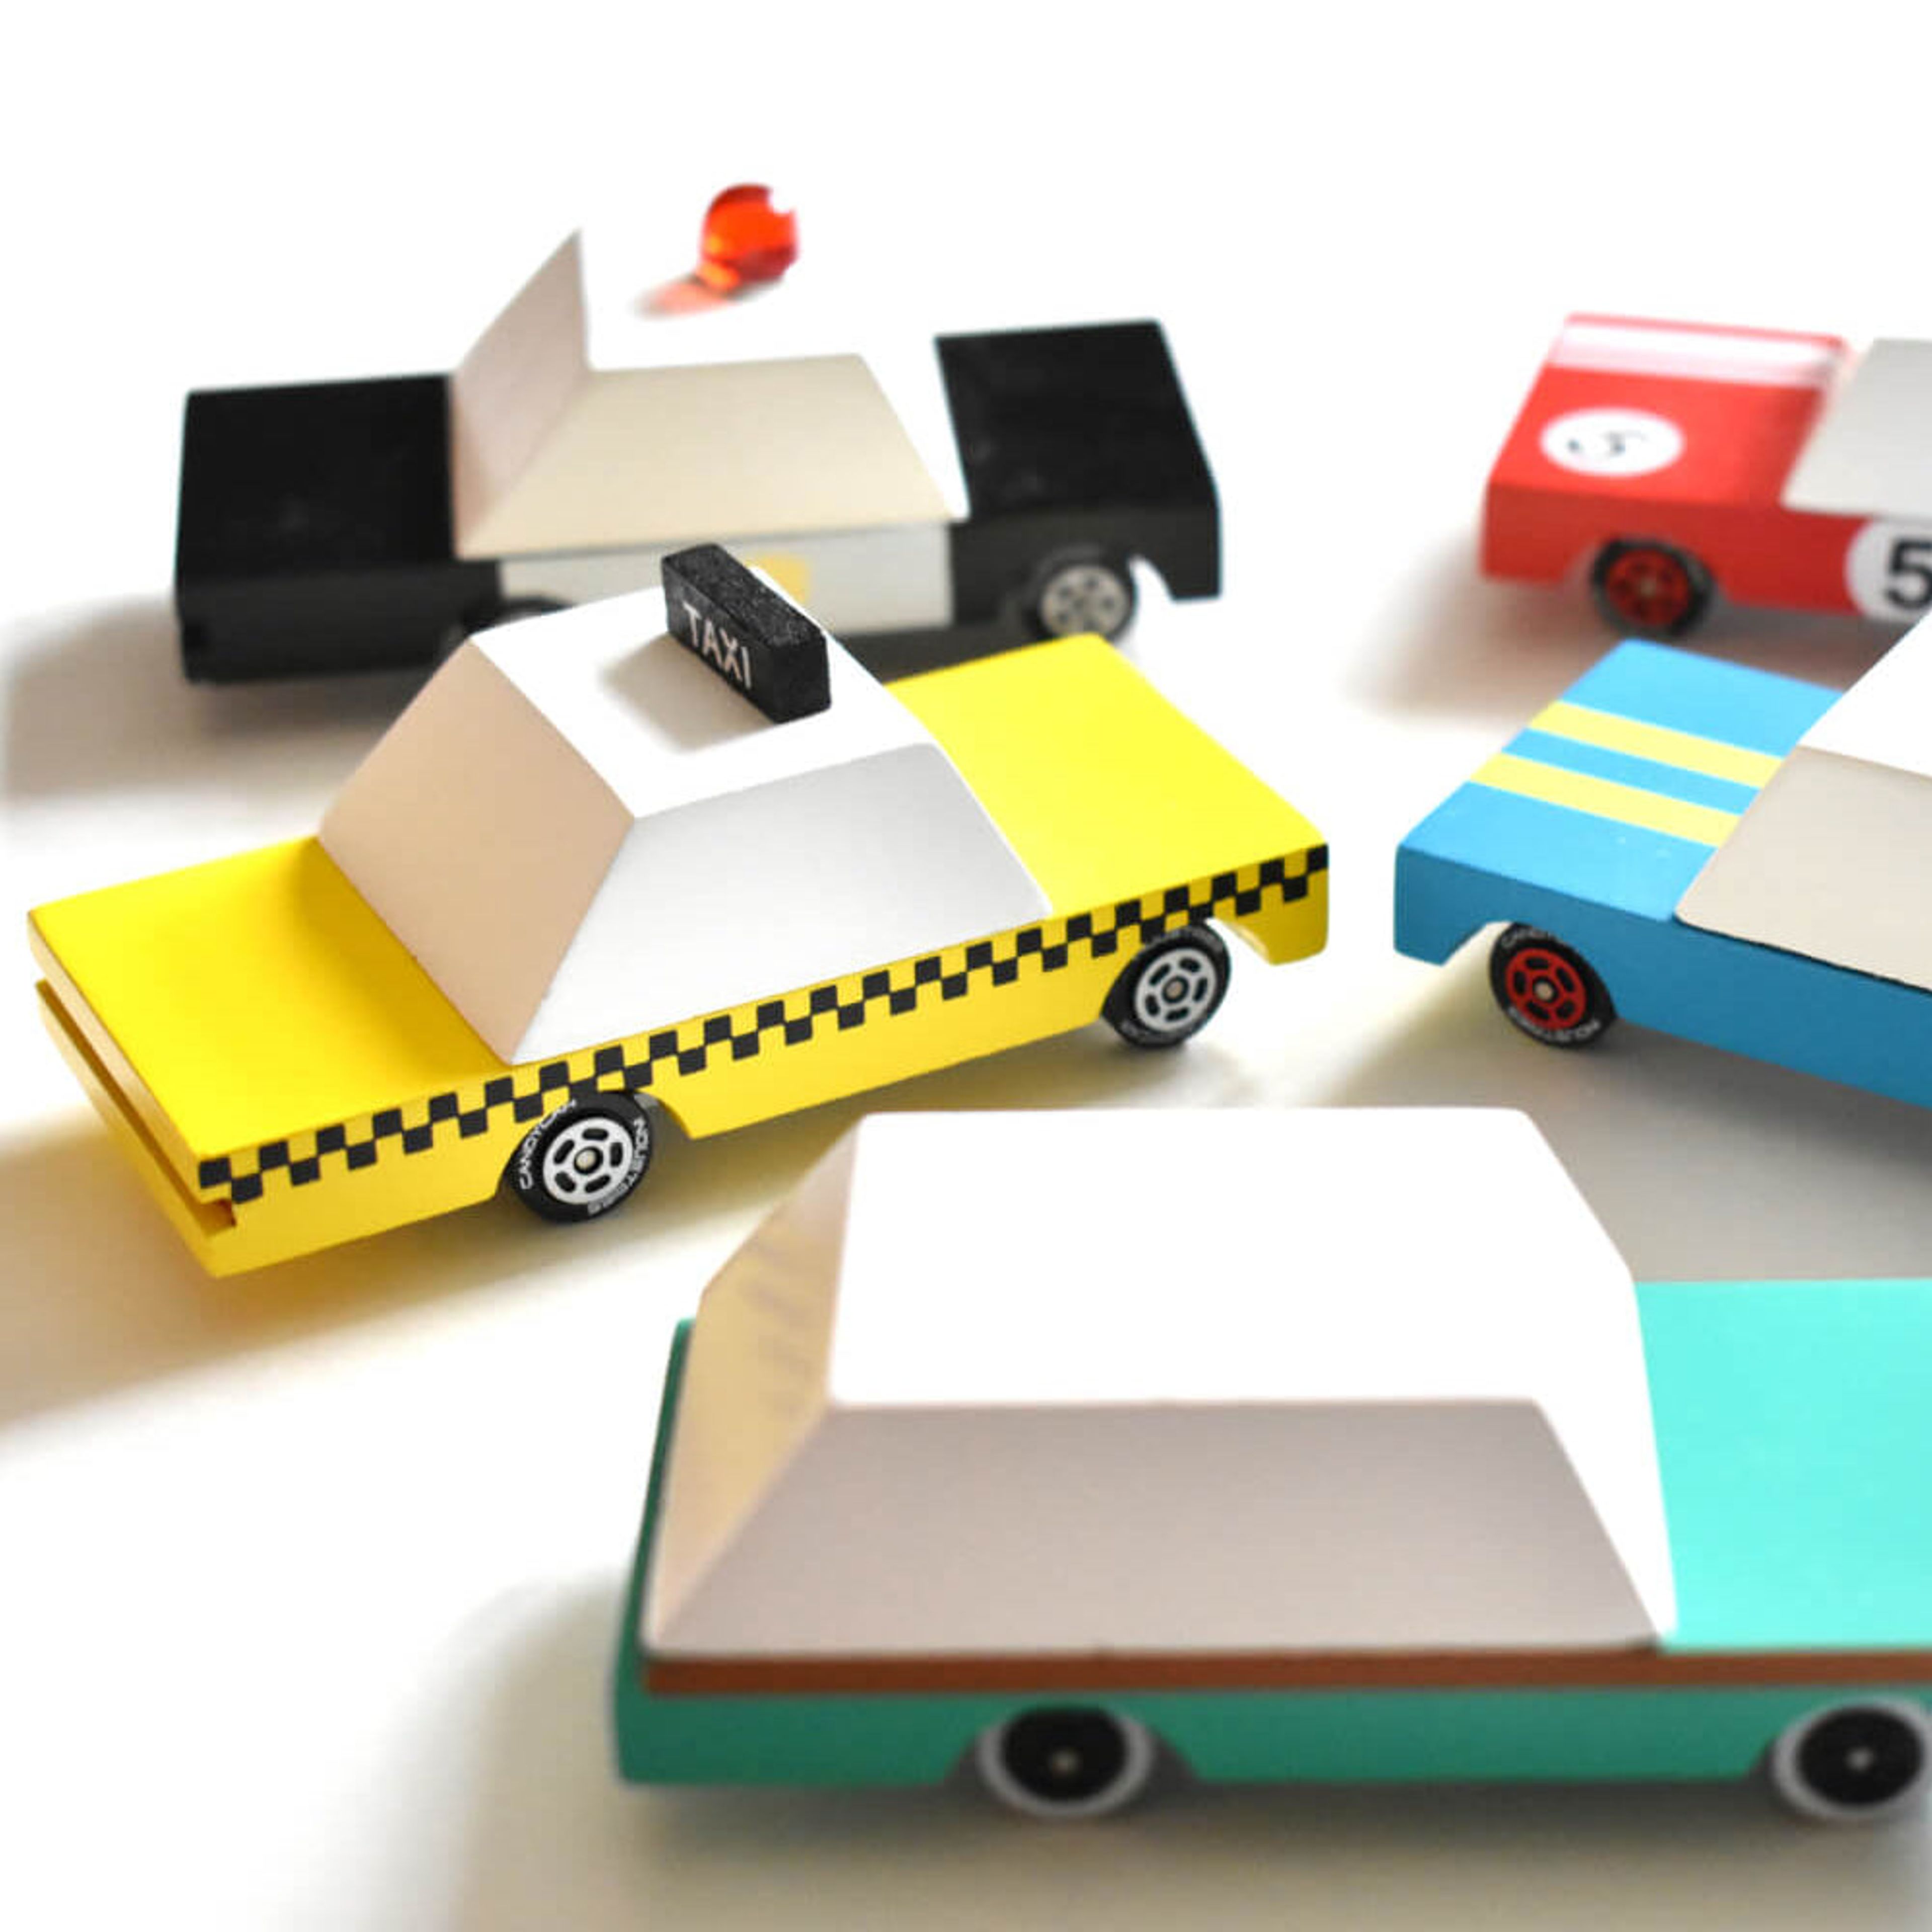 Candylab Toy Cars: "These are my kids favorite cars!"